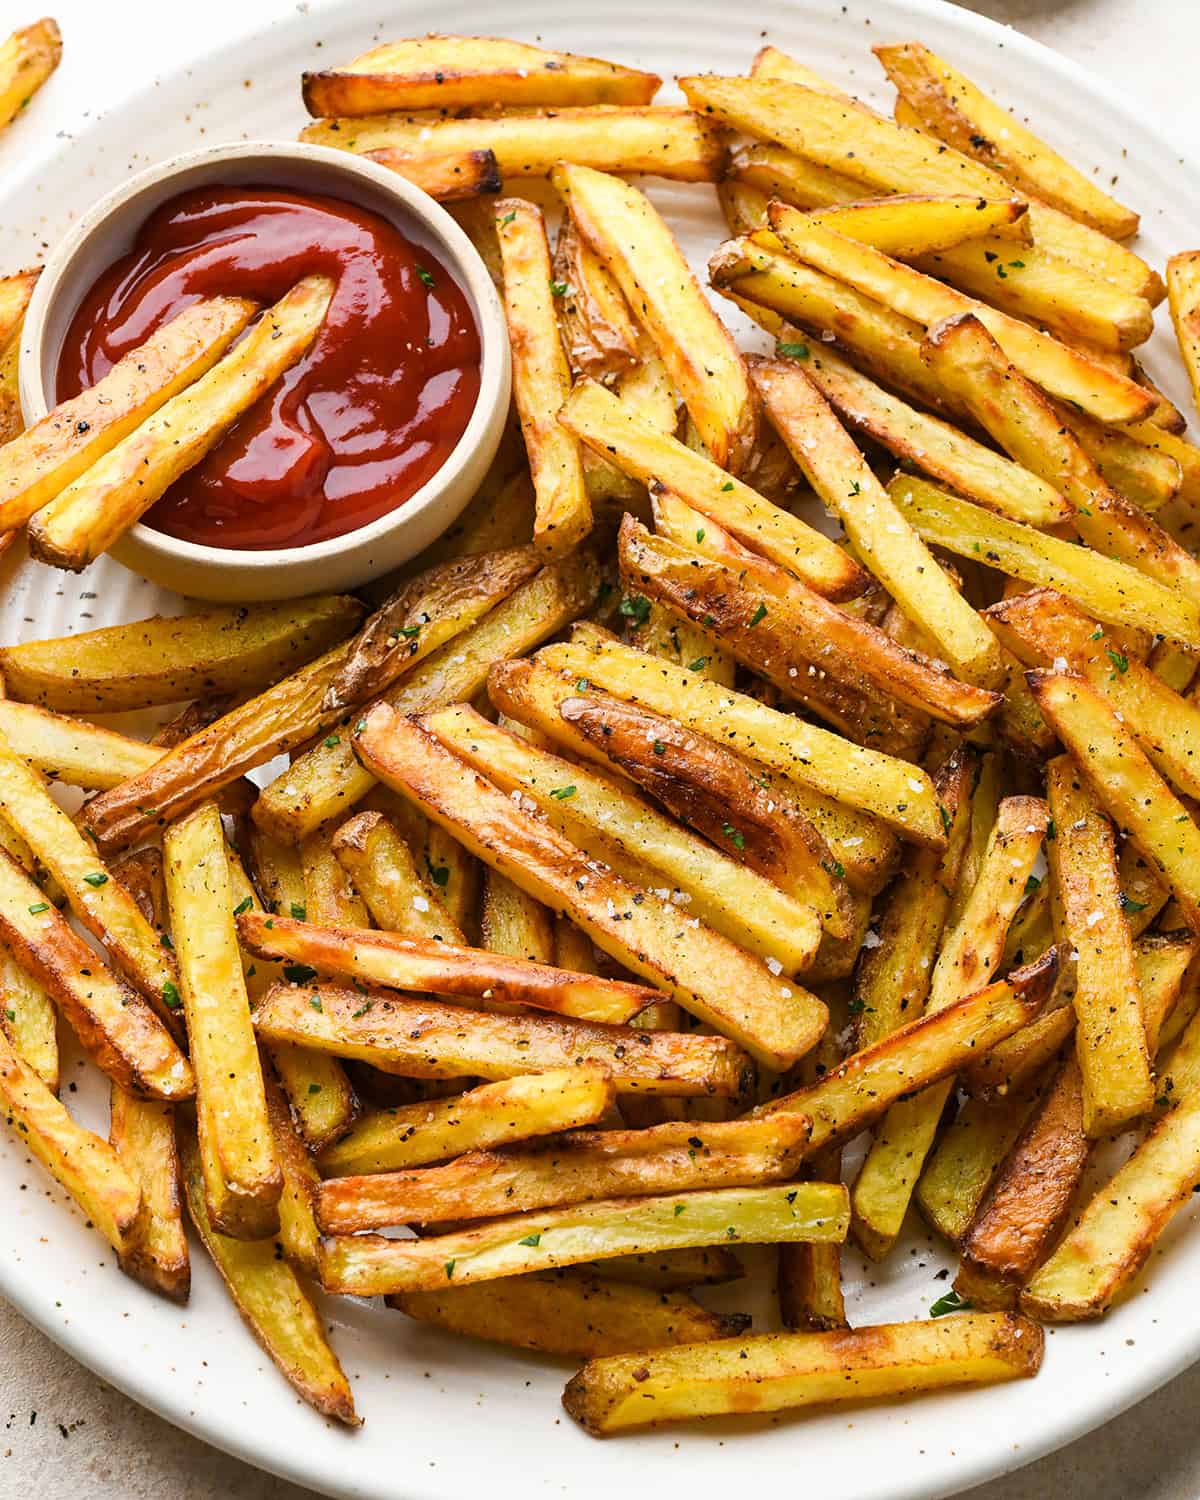 homemade french fries on a plate with a bowl of ketchup